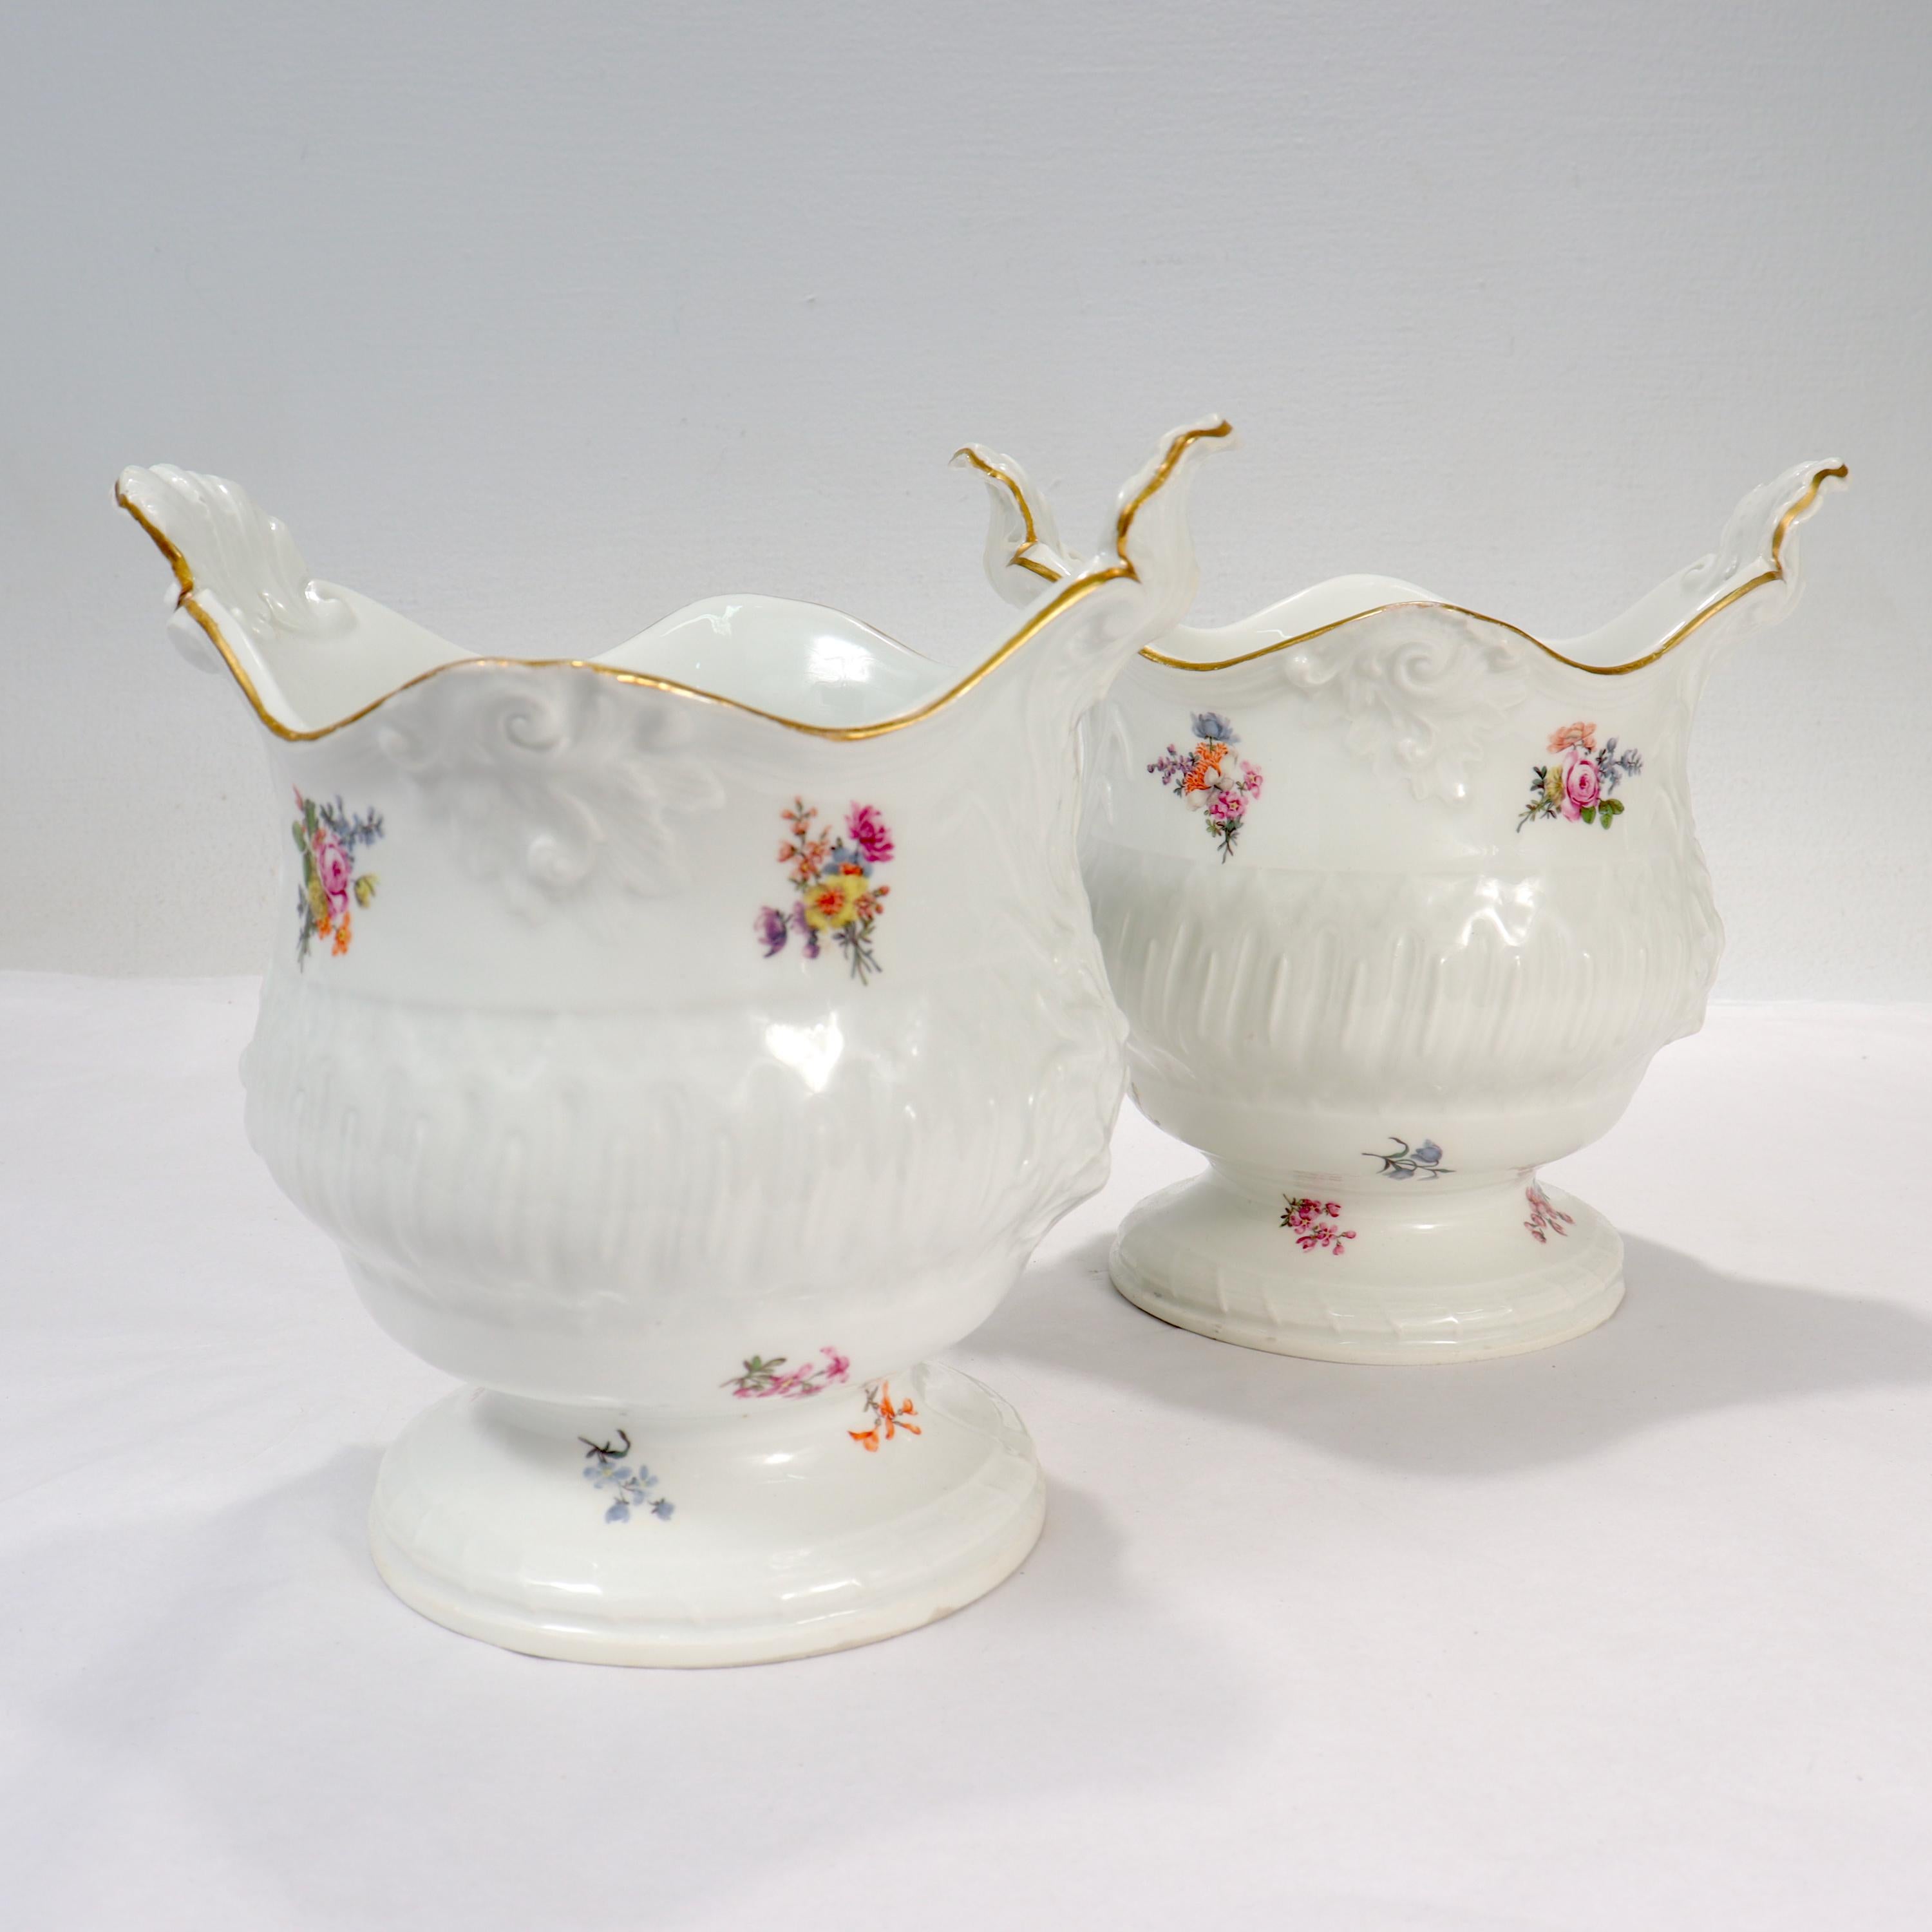 A fine pair of antique Meissen cachepots.

With baluster form bodies, shell handles, raised shell & cattail decoration to the sides, and handpainted floral sprays throughout.

Dating to the late 18th or early 19th century.

Simply a fine and